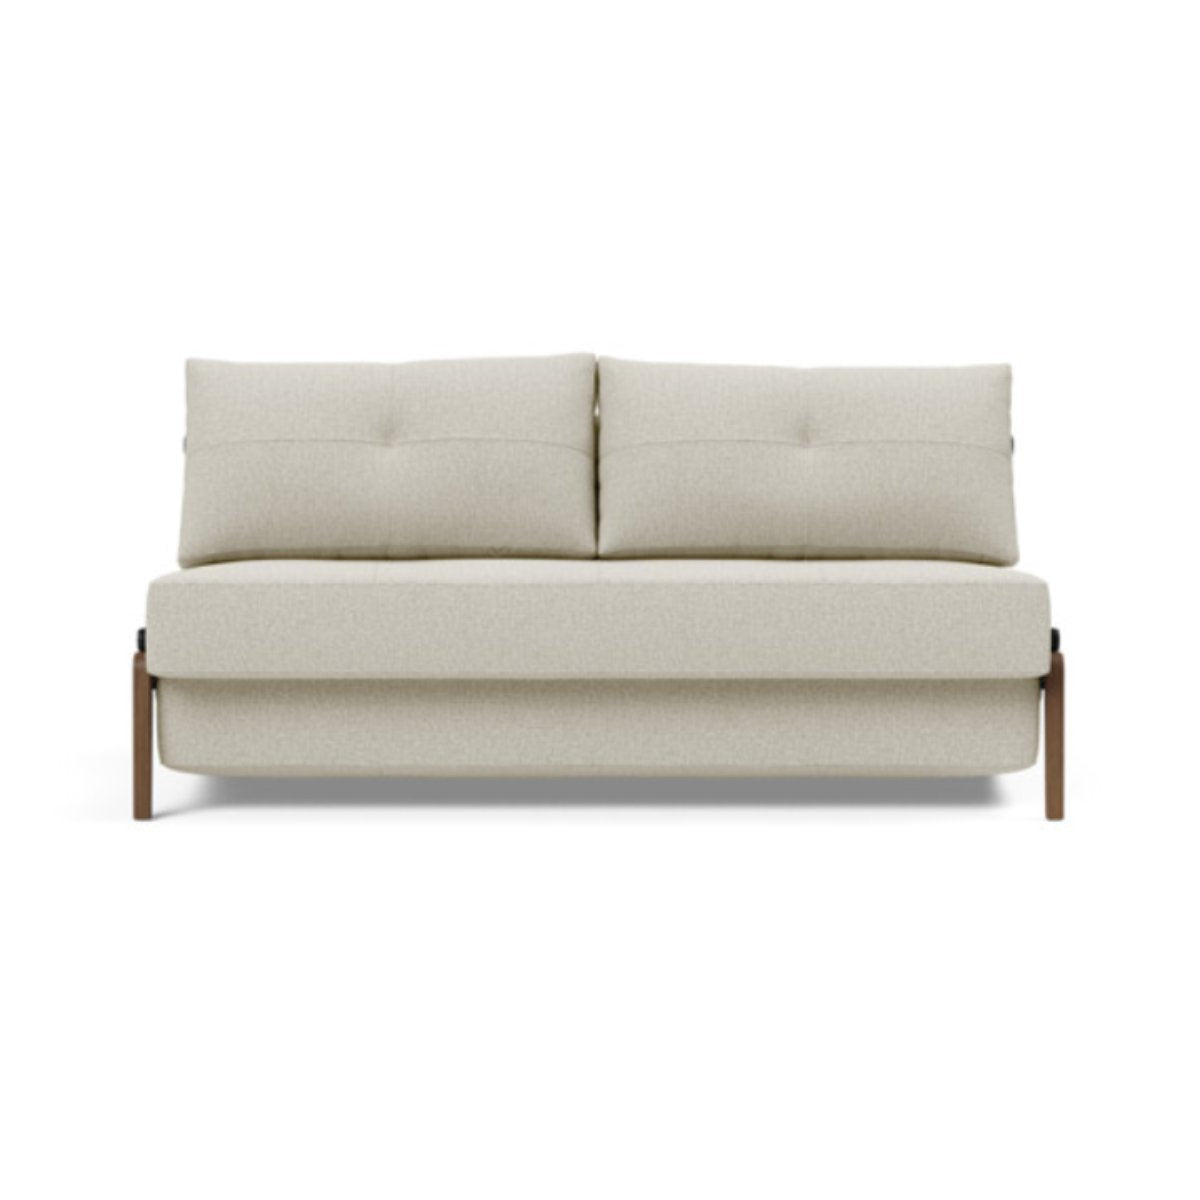 Cubed Queen Size Sofa Bed With Dark Wood Legs 527 Mixed Dance NaturalSofa Beds INNOVATION  527 Mixed Dance Natural   Four Hands, Burke Decor, Mid Century Modern Furniture, Old Bones Furniture Company, Old Bones Co, Modern Mid Century, Designer Furniture, https://www.oldbonesco.com/